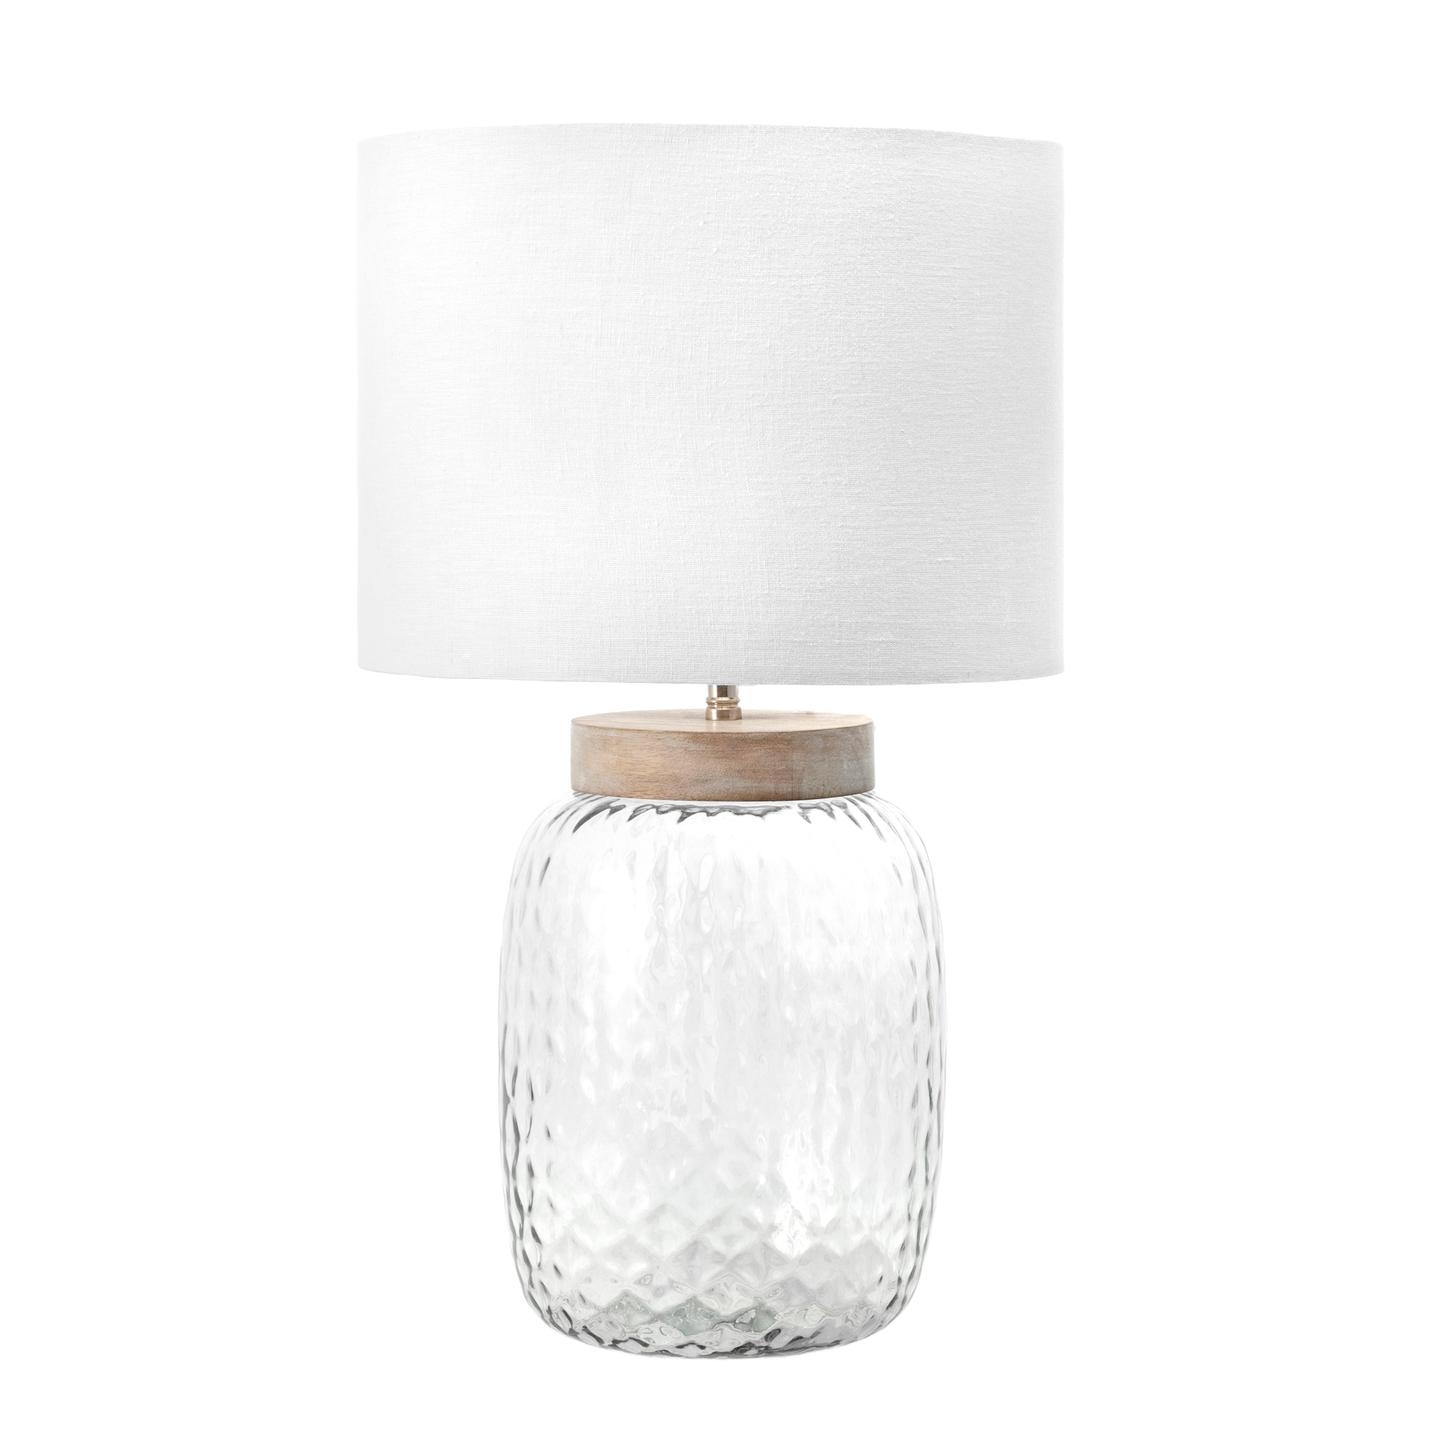 Haines Glass Table Lamp, 20" - Image 0